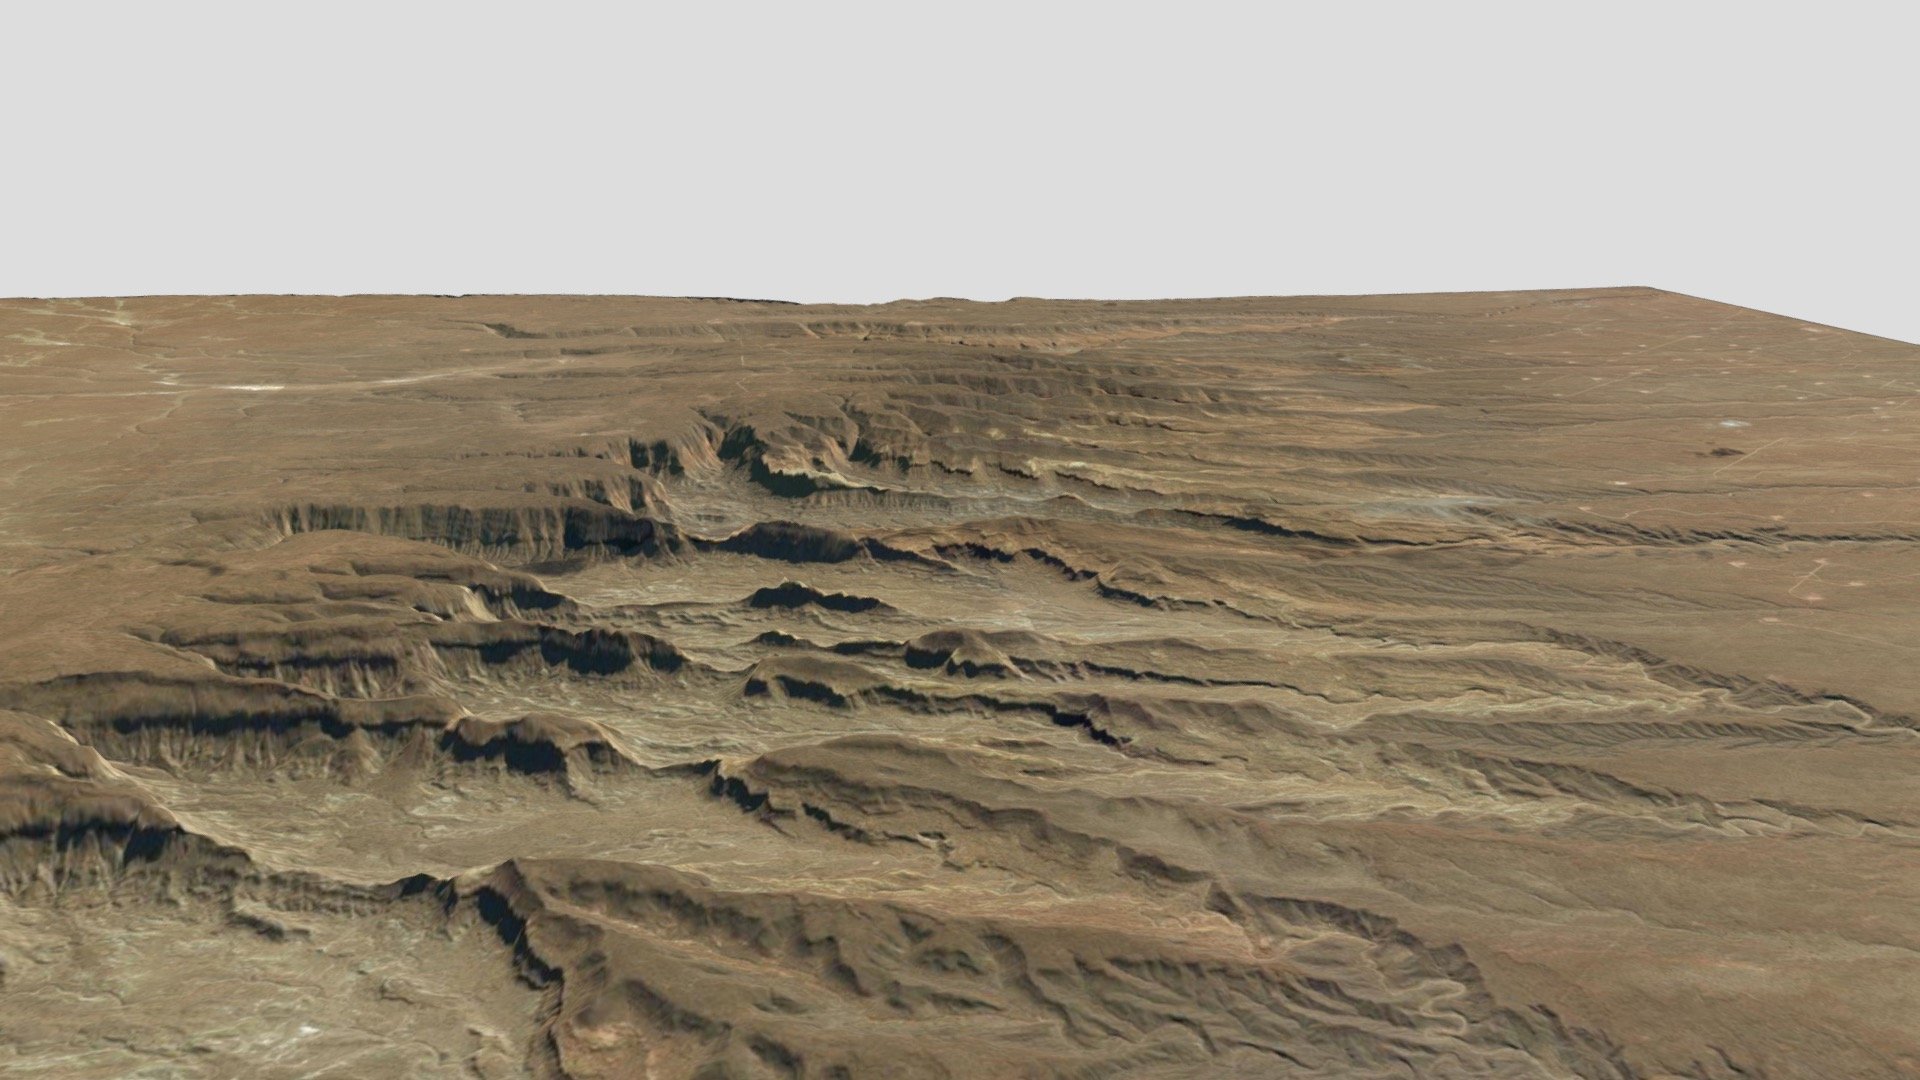 Erosion east of the Andes